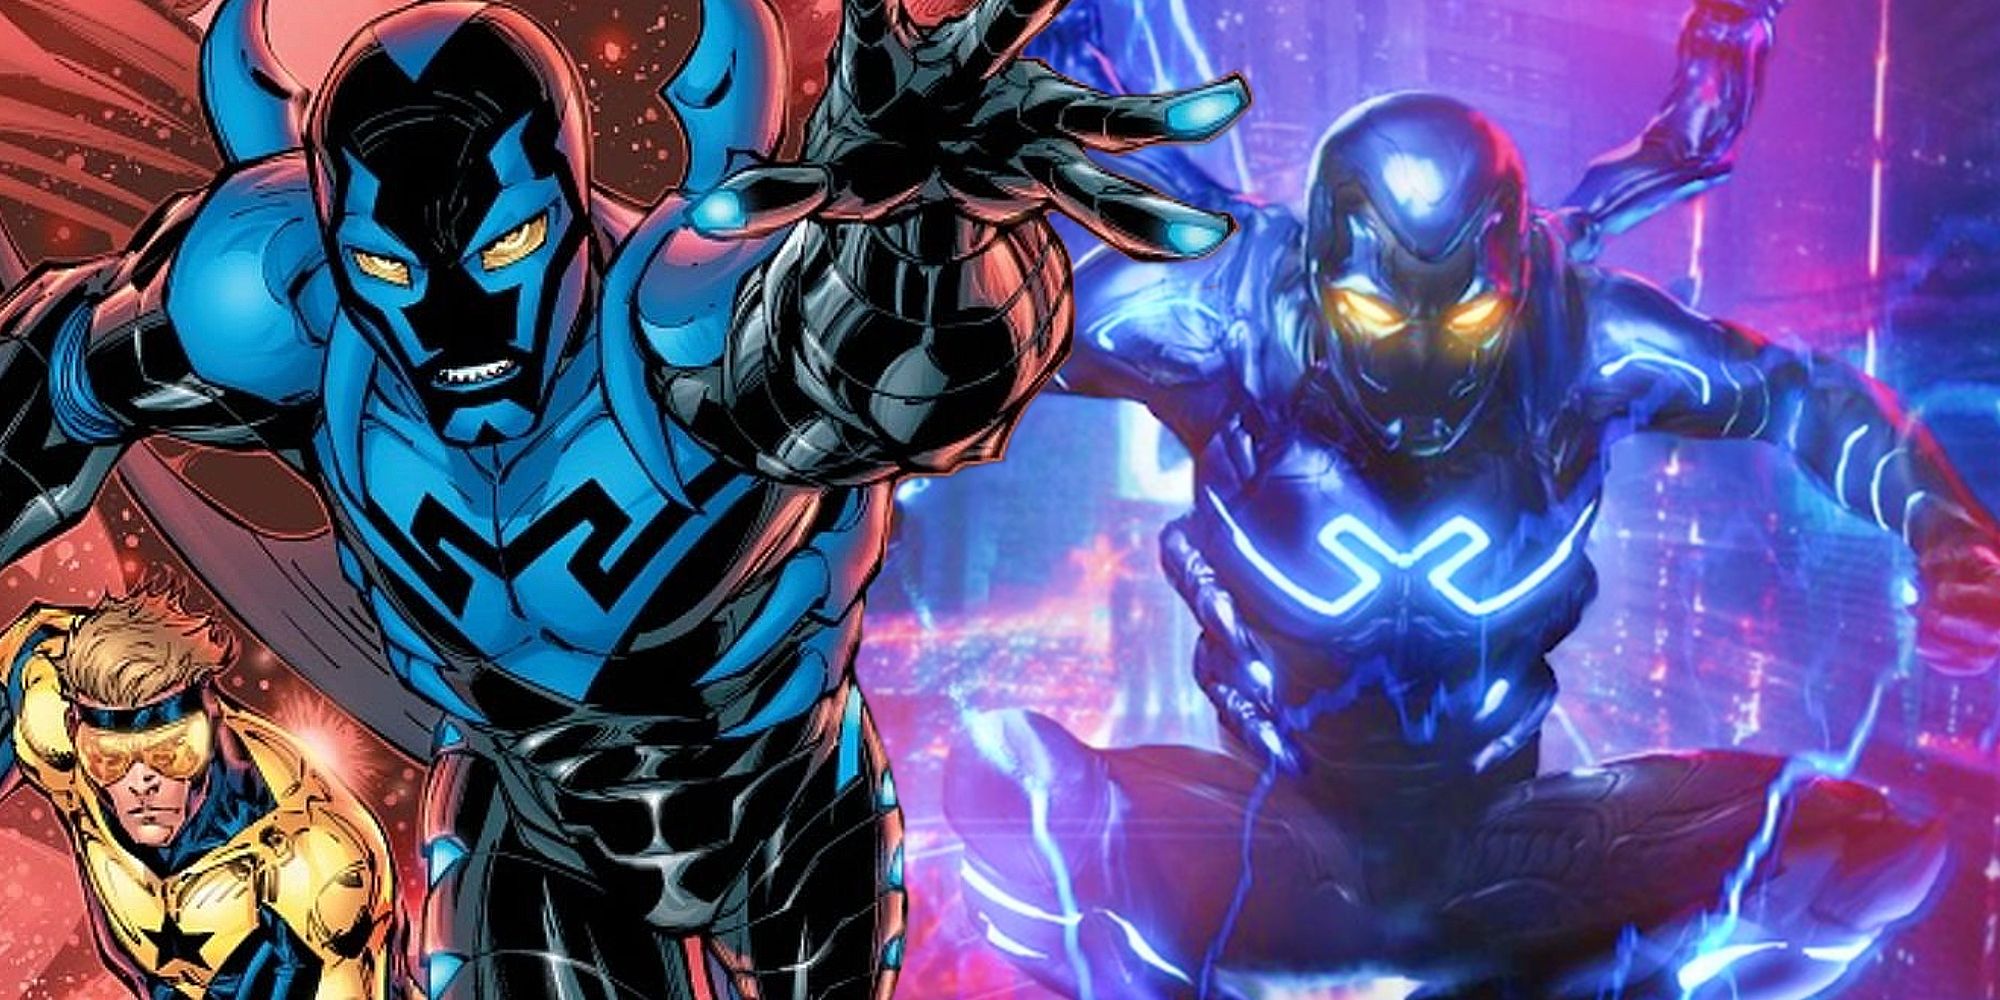 Blue Beetle in official DCU artwork next to Jaime Reyes' Blue Beetle from DC Comics